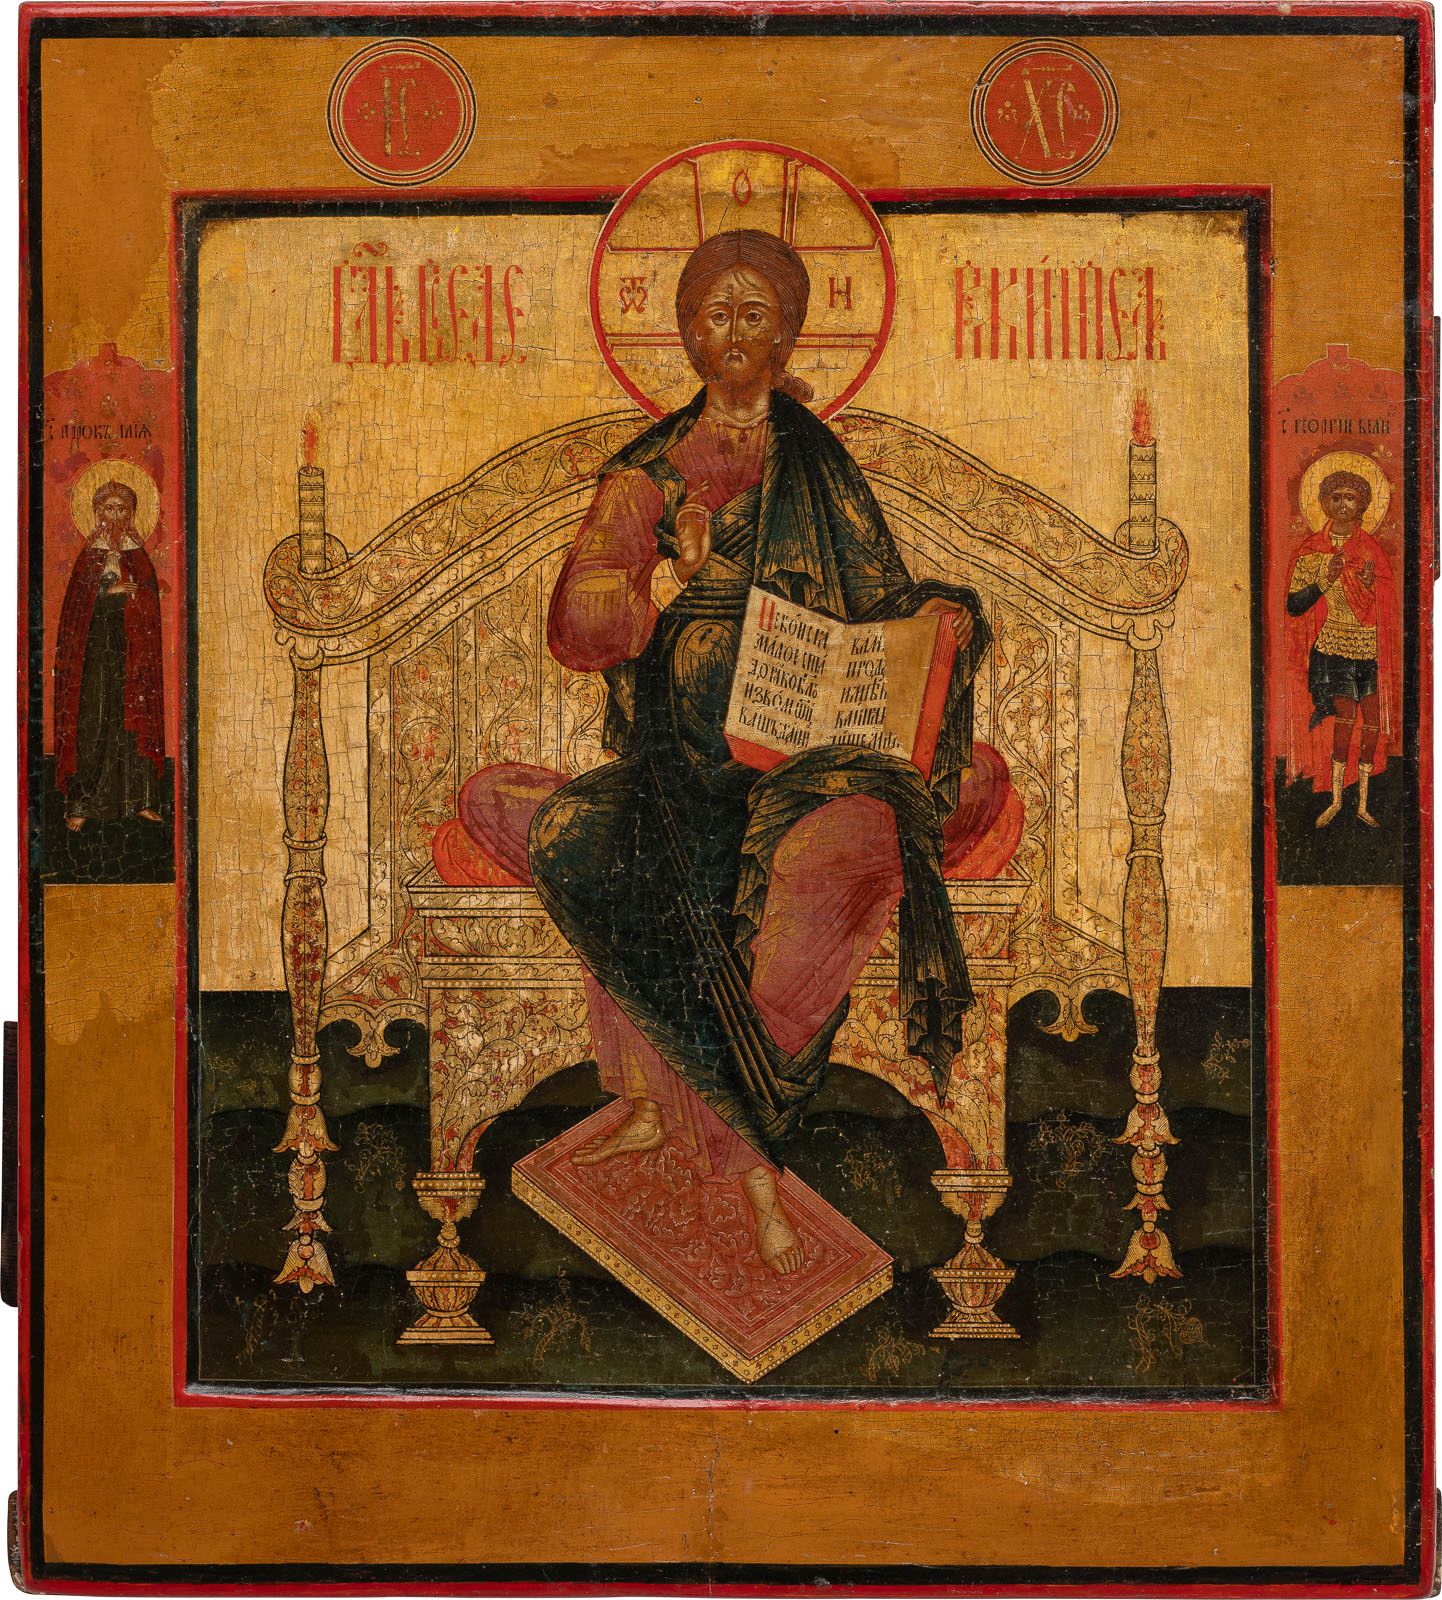 A FINE ICON SHOWING THE ENTHRONED CHRIST FINA ICONA QUE MUESTRA A CRISTO ENTRONA&hellip;